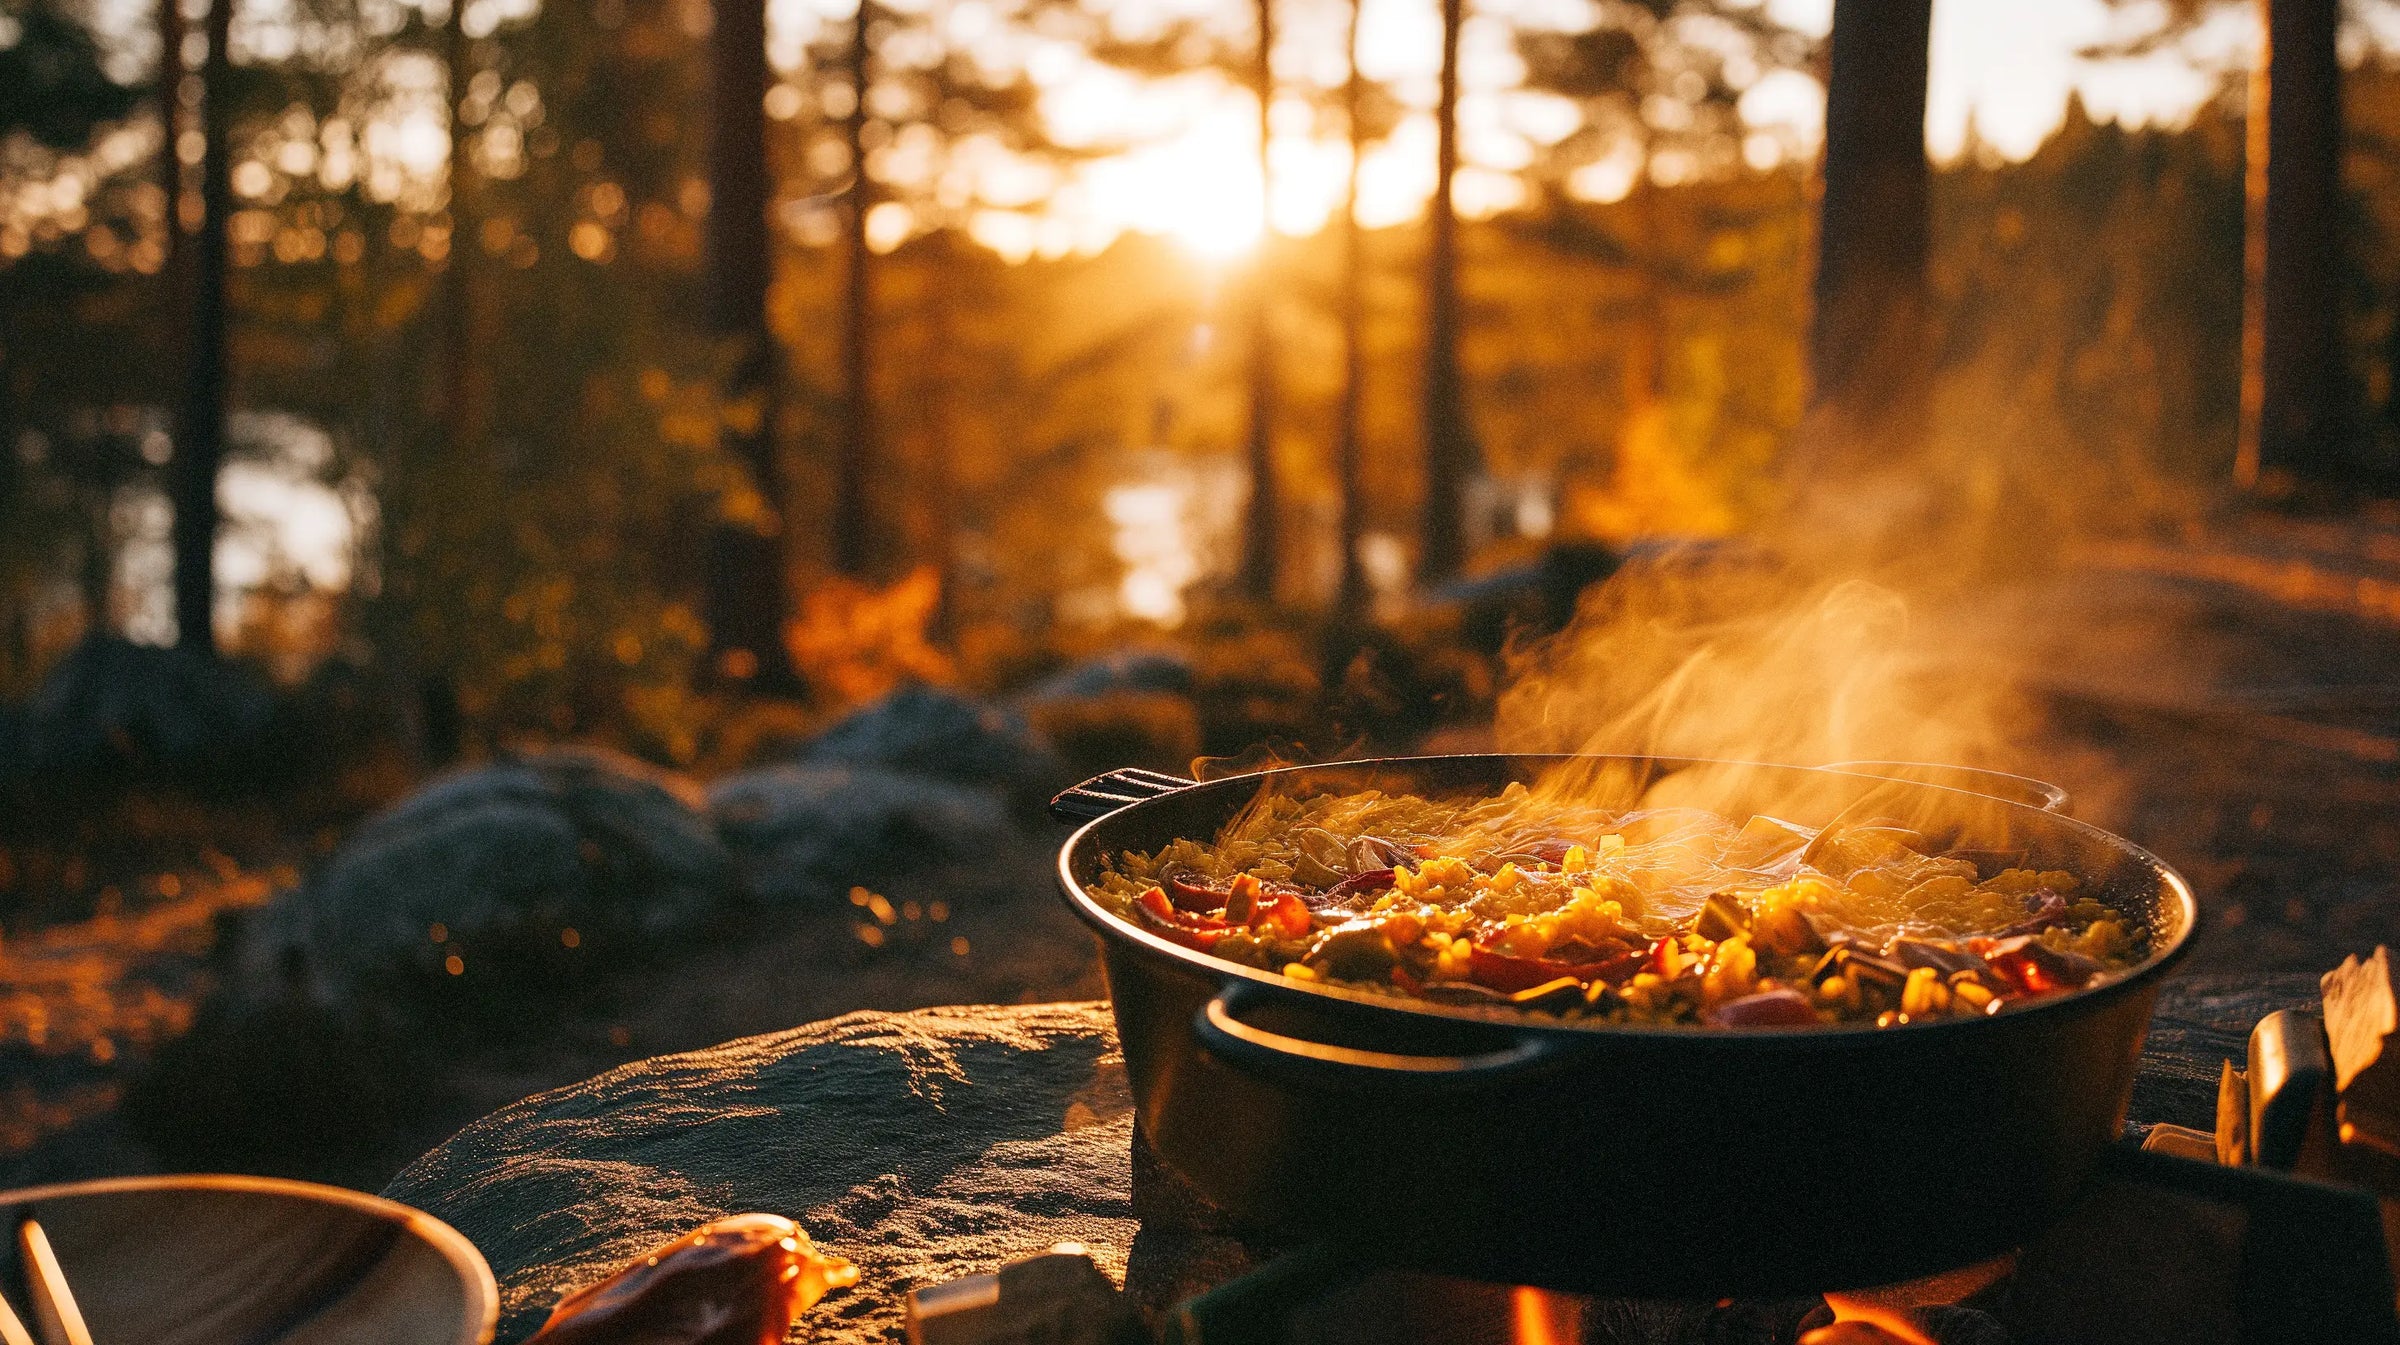 Cooking Paella with Saffron - Outdoors in a Swedish Forest